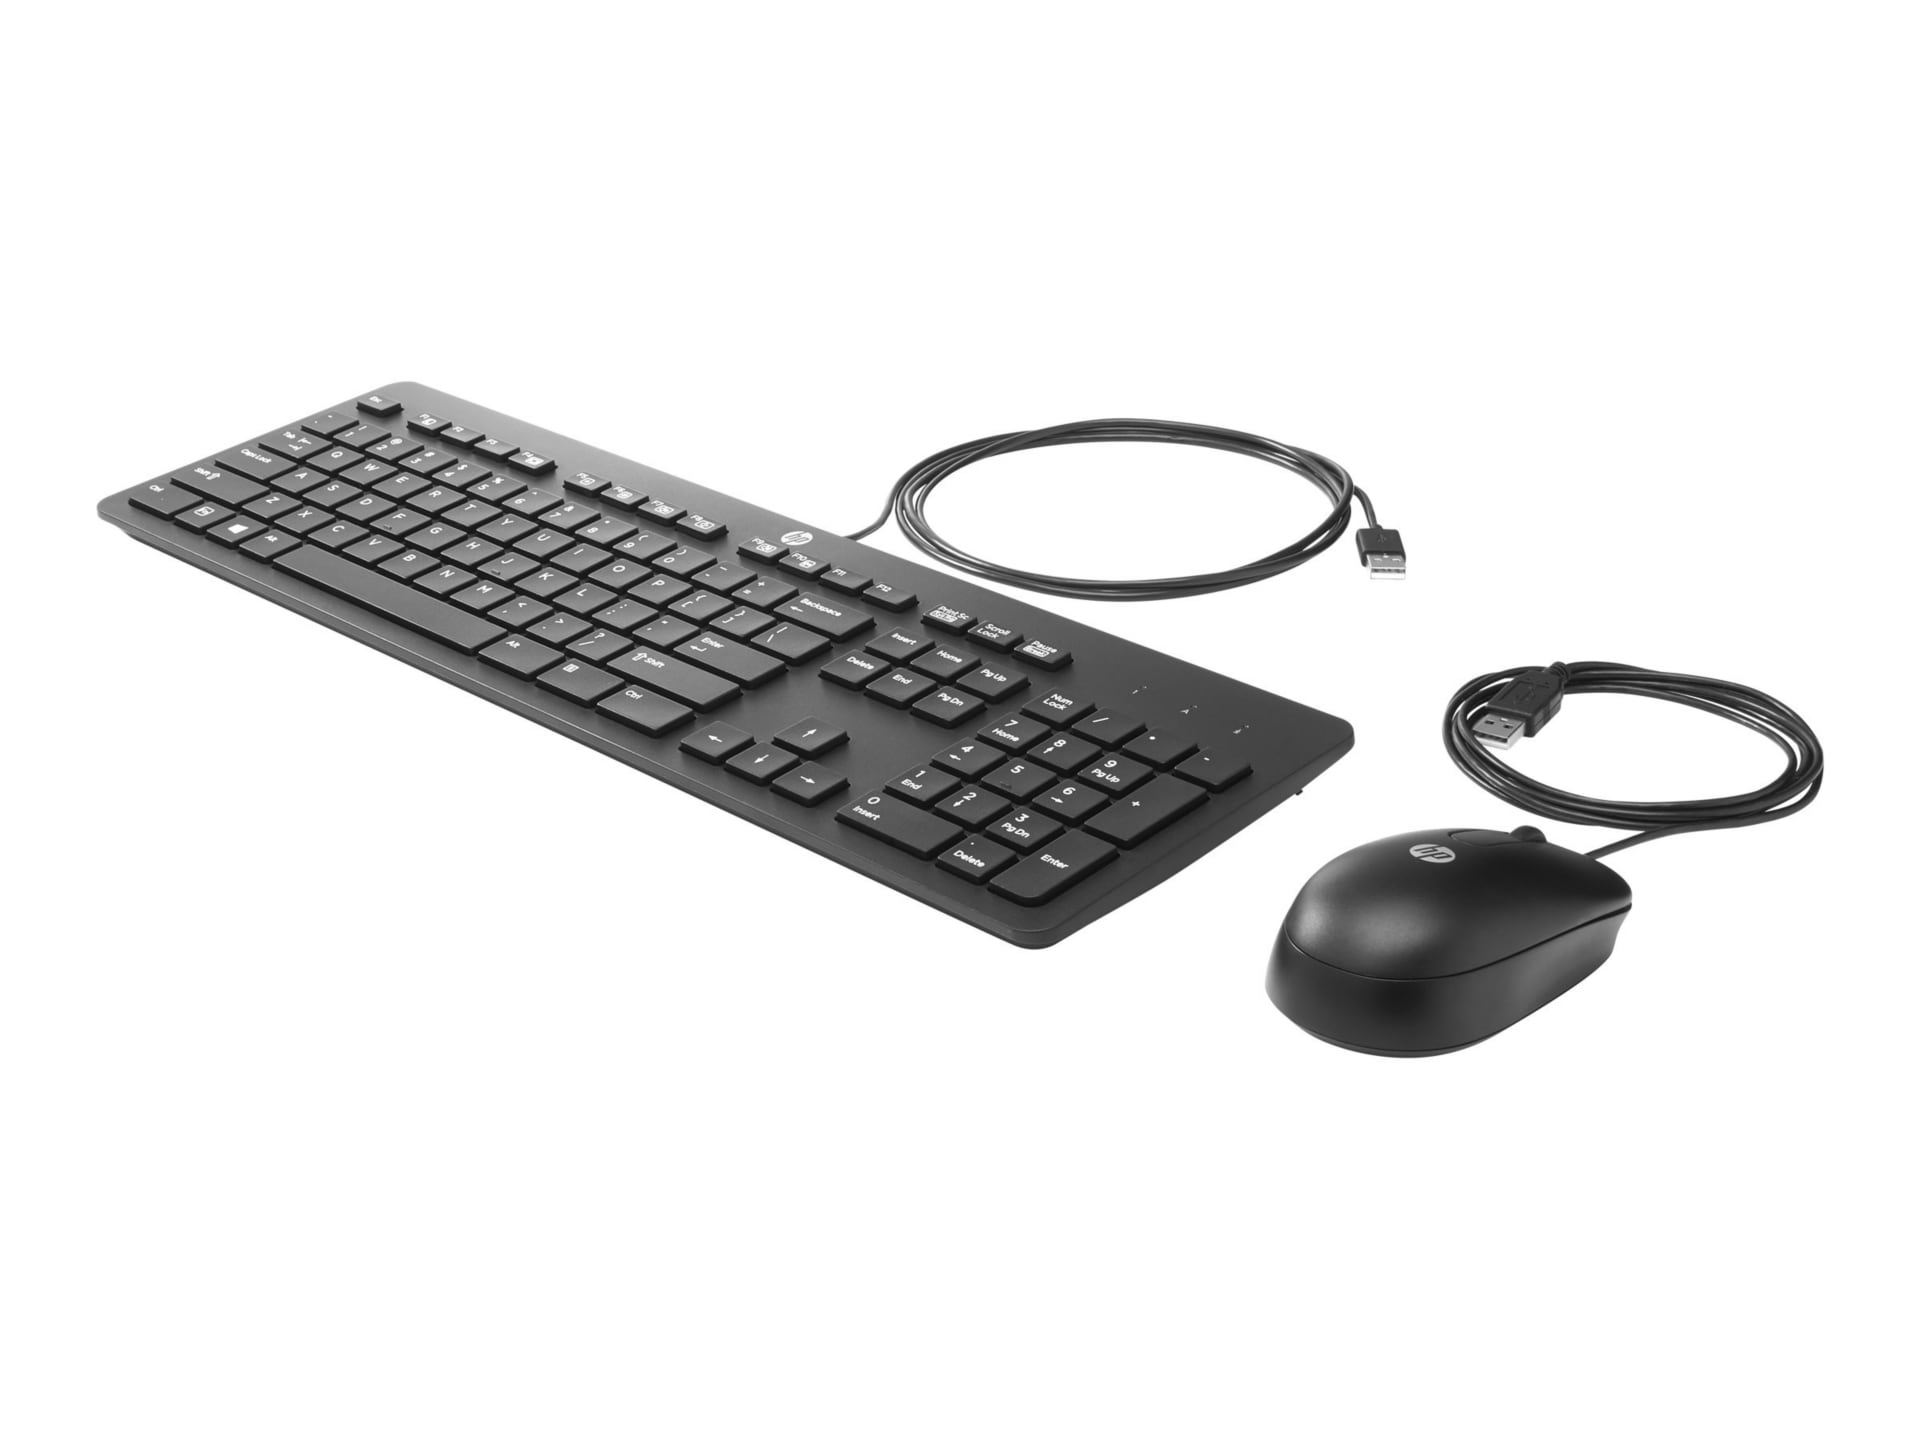 Hp Business Slim Keyboard And Mouse Set Us Smart Buy T4e63at Aba